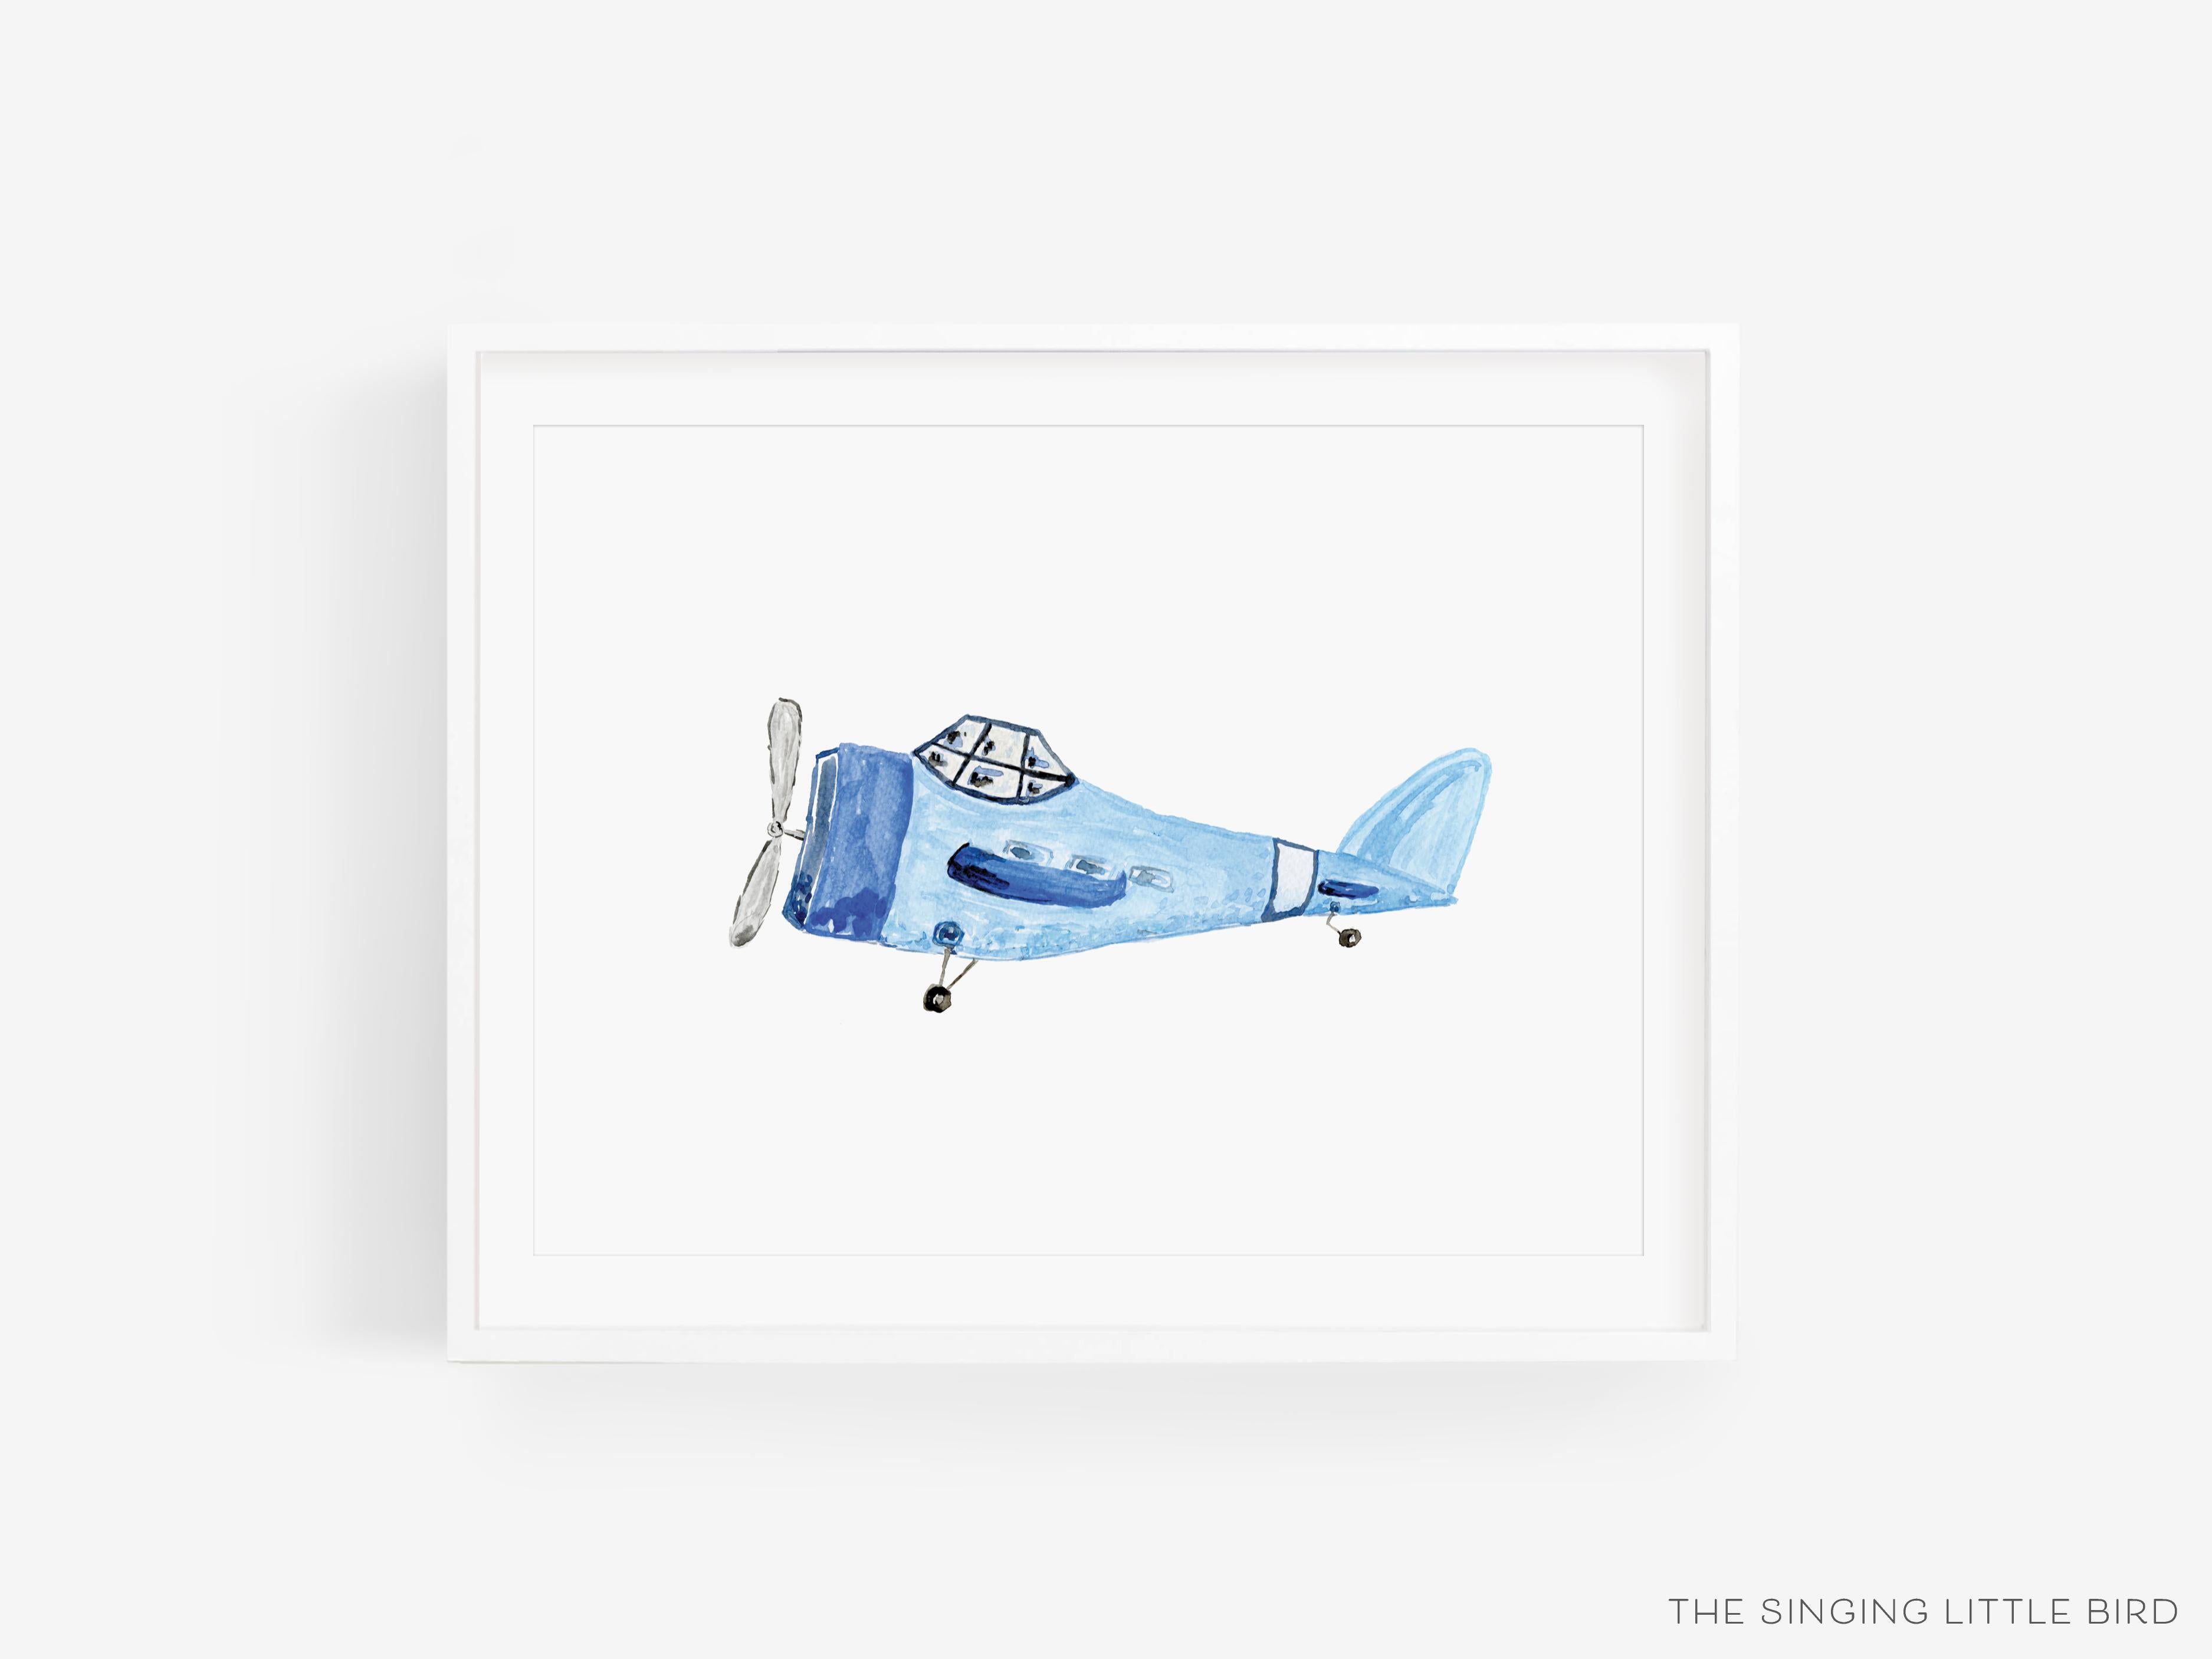 Vintage Airplane Art Print-This watercolor art print features our hand-painted vintage airplane, printed in the USA on 120lb high quality art paper. This makes a great gift or wall decor for the vintage lover in your life.-The Singing Little Bird